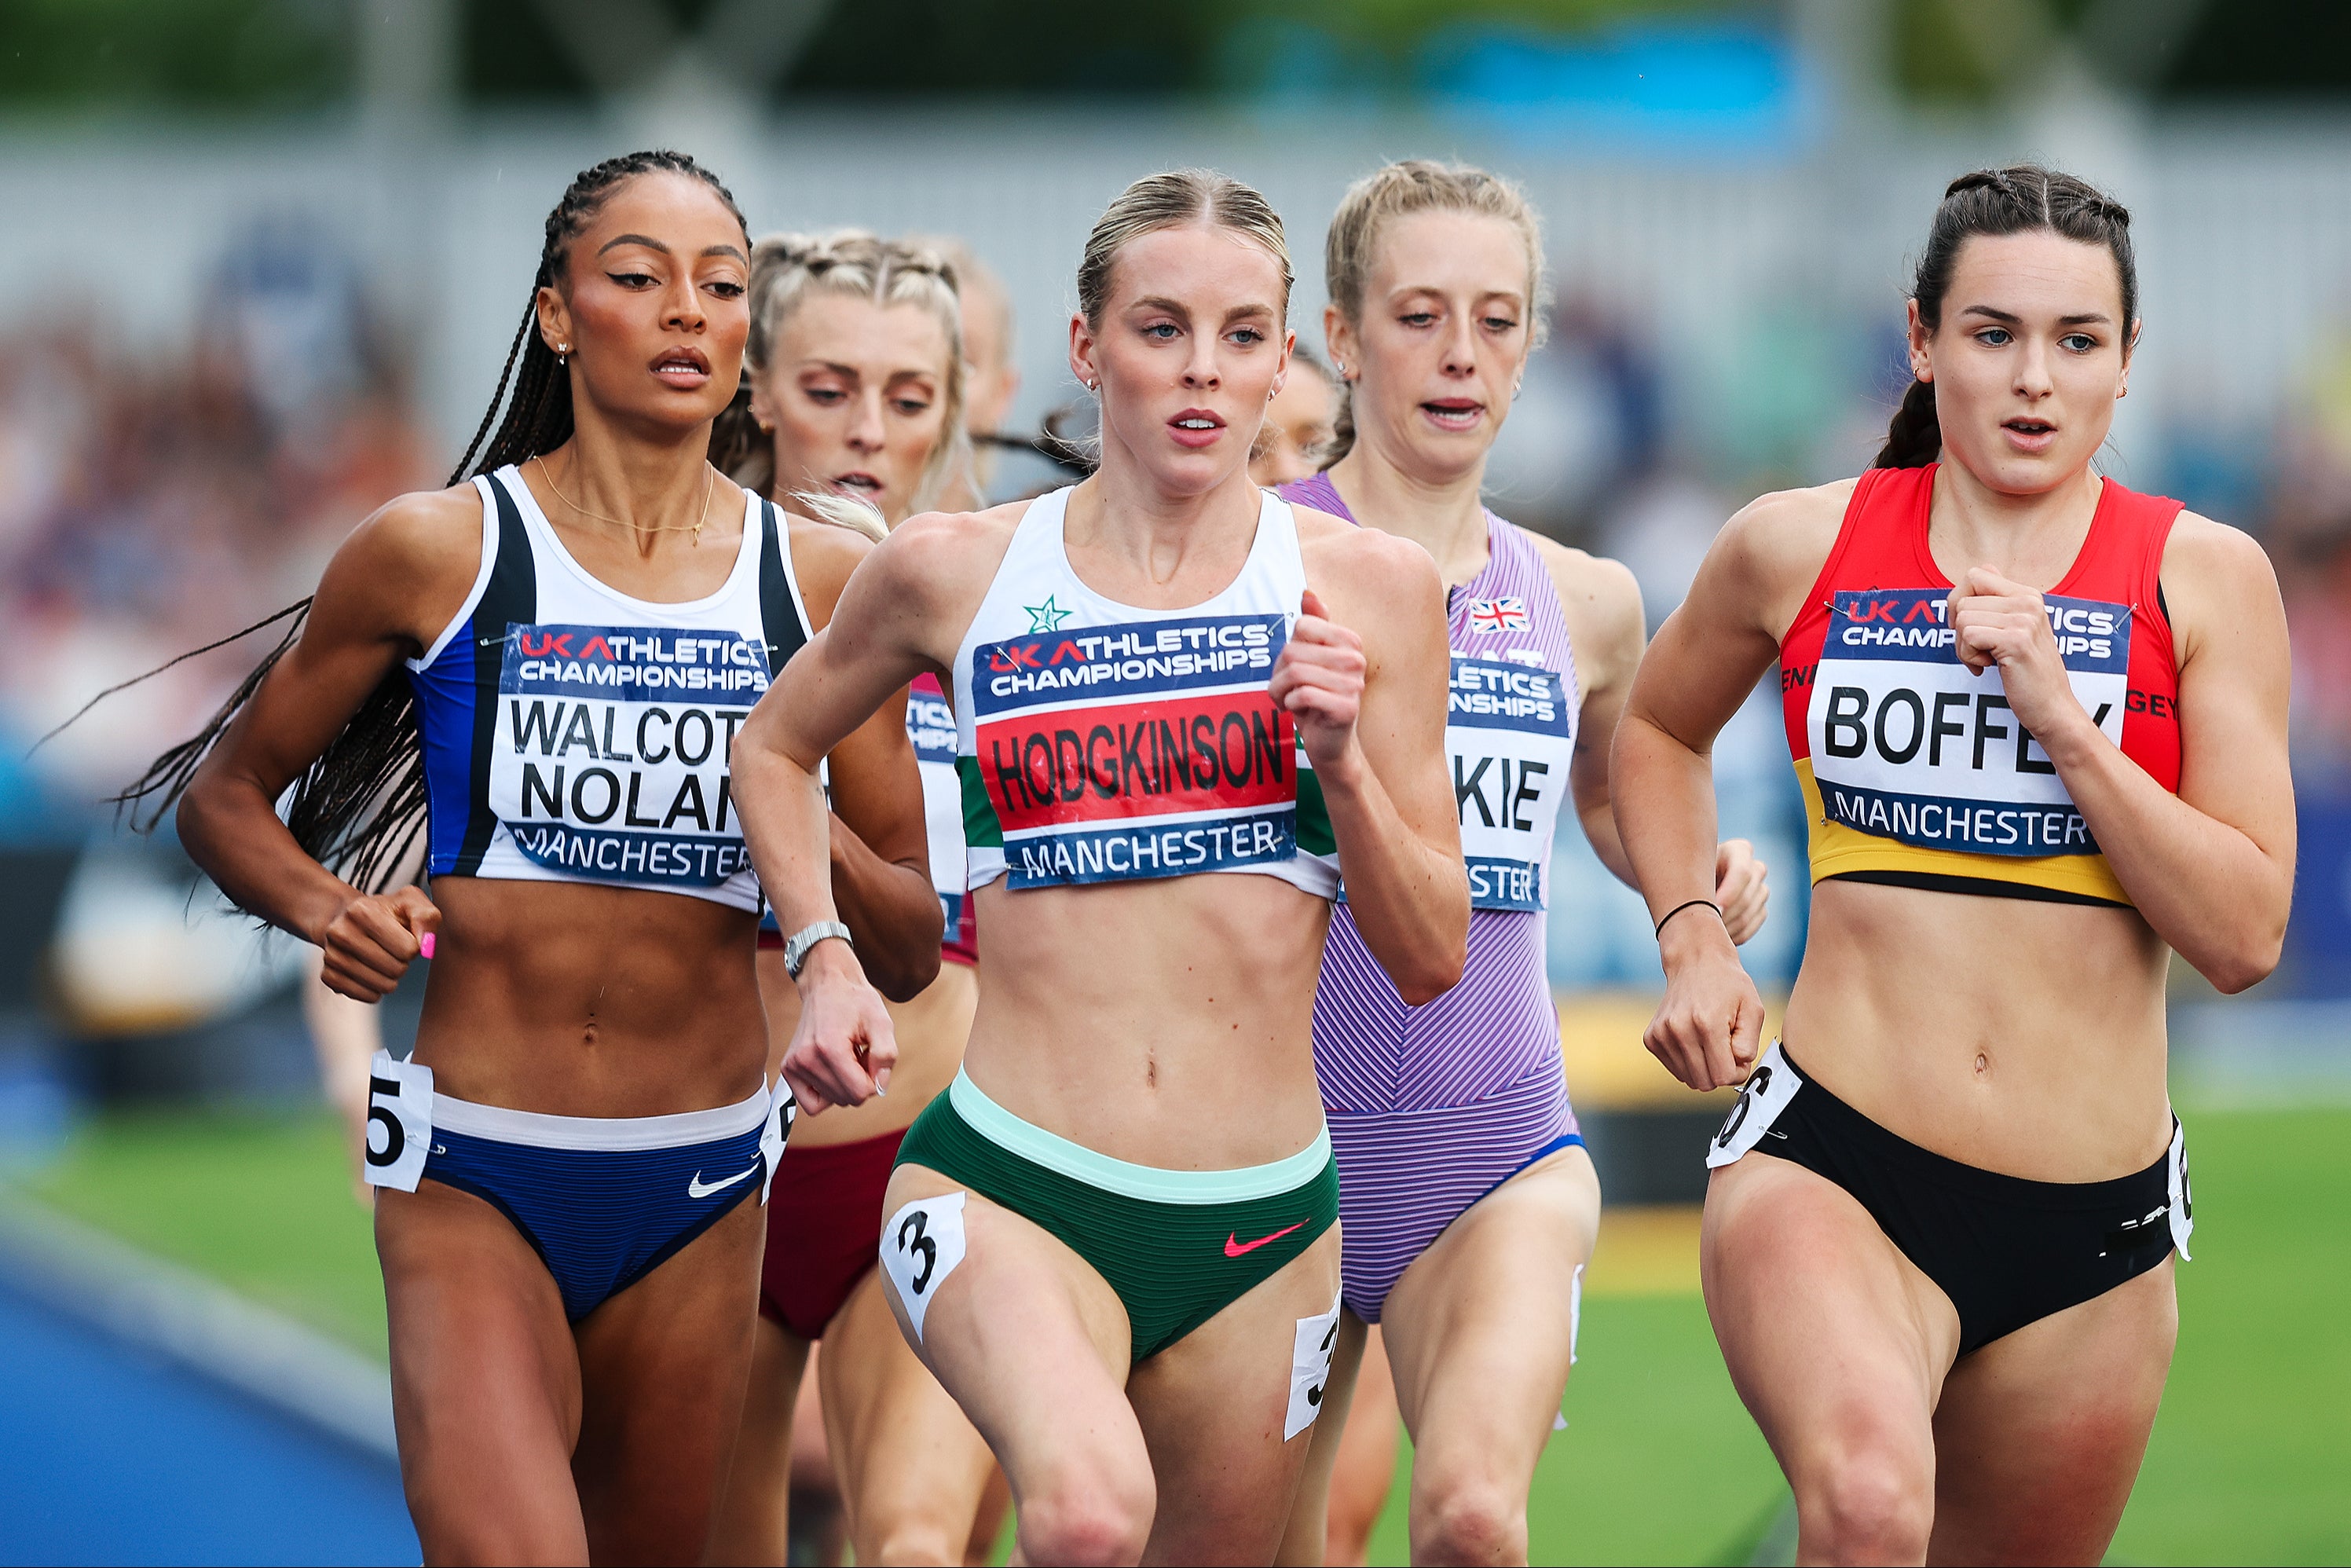 phoebe gill, keely hodgkinson, paris 2024, laura muir, british athletics, team gb, uk athletics, who is phoebe gill? the teenage runner who could make paris 2024